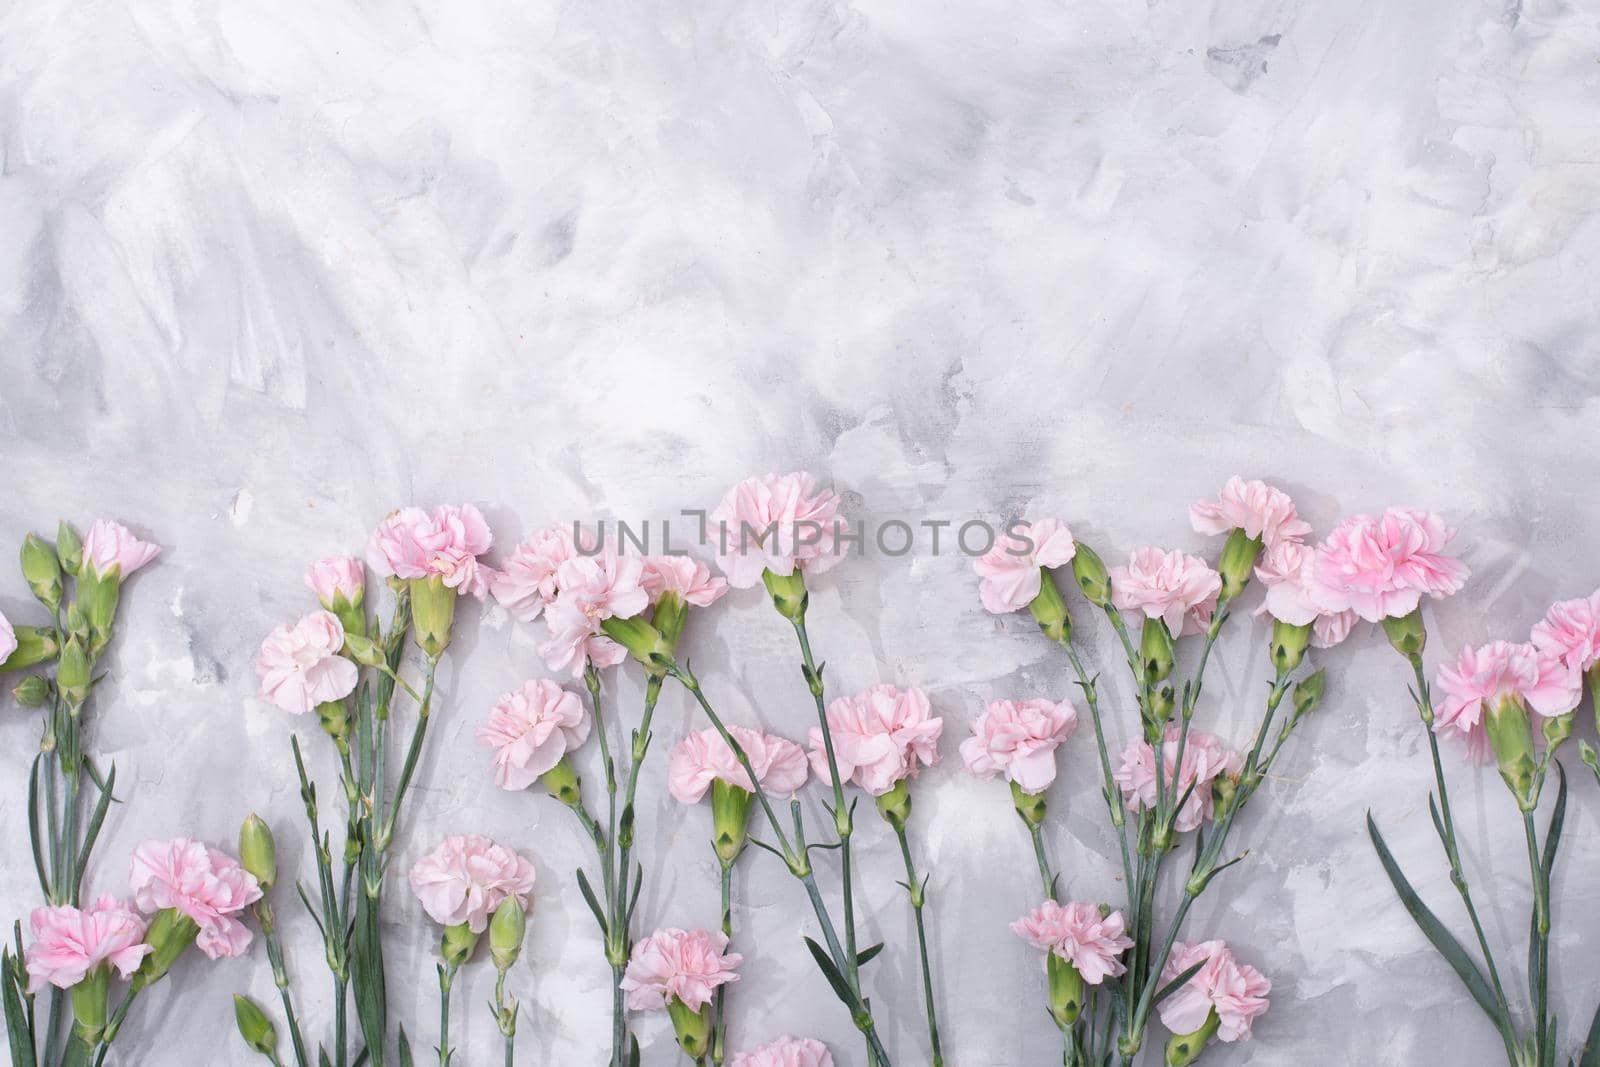 loose pink carnations scattered on cement background, spring holidays, valentine's day, international women's day on march 8, may 1 labor day, copy space. High quality photo